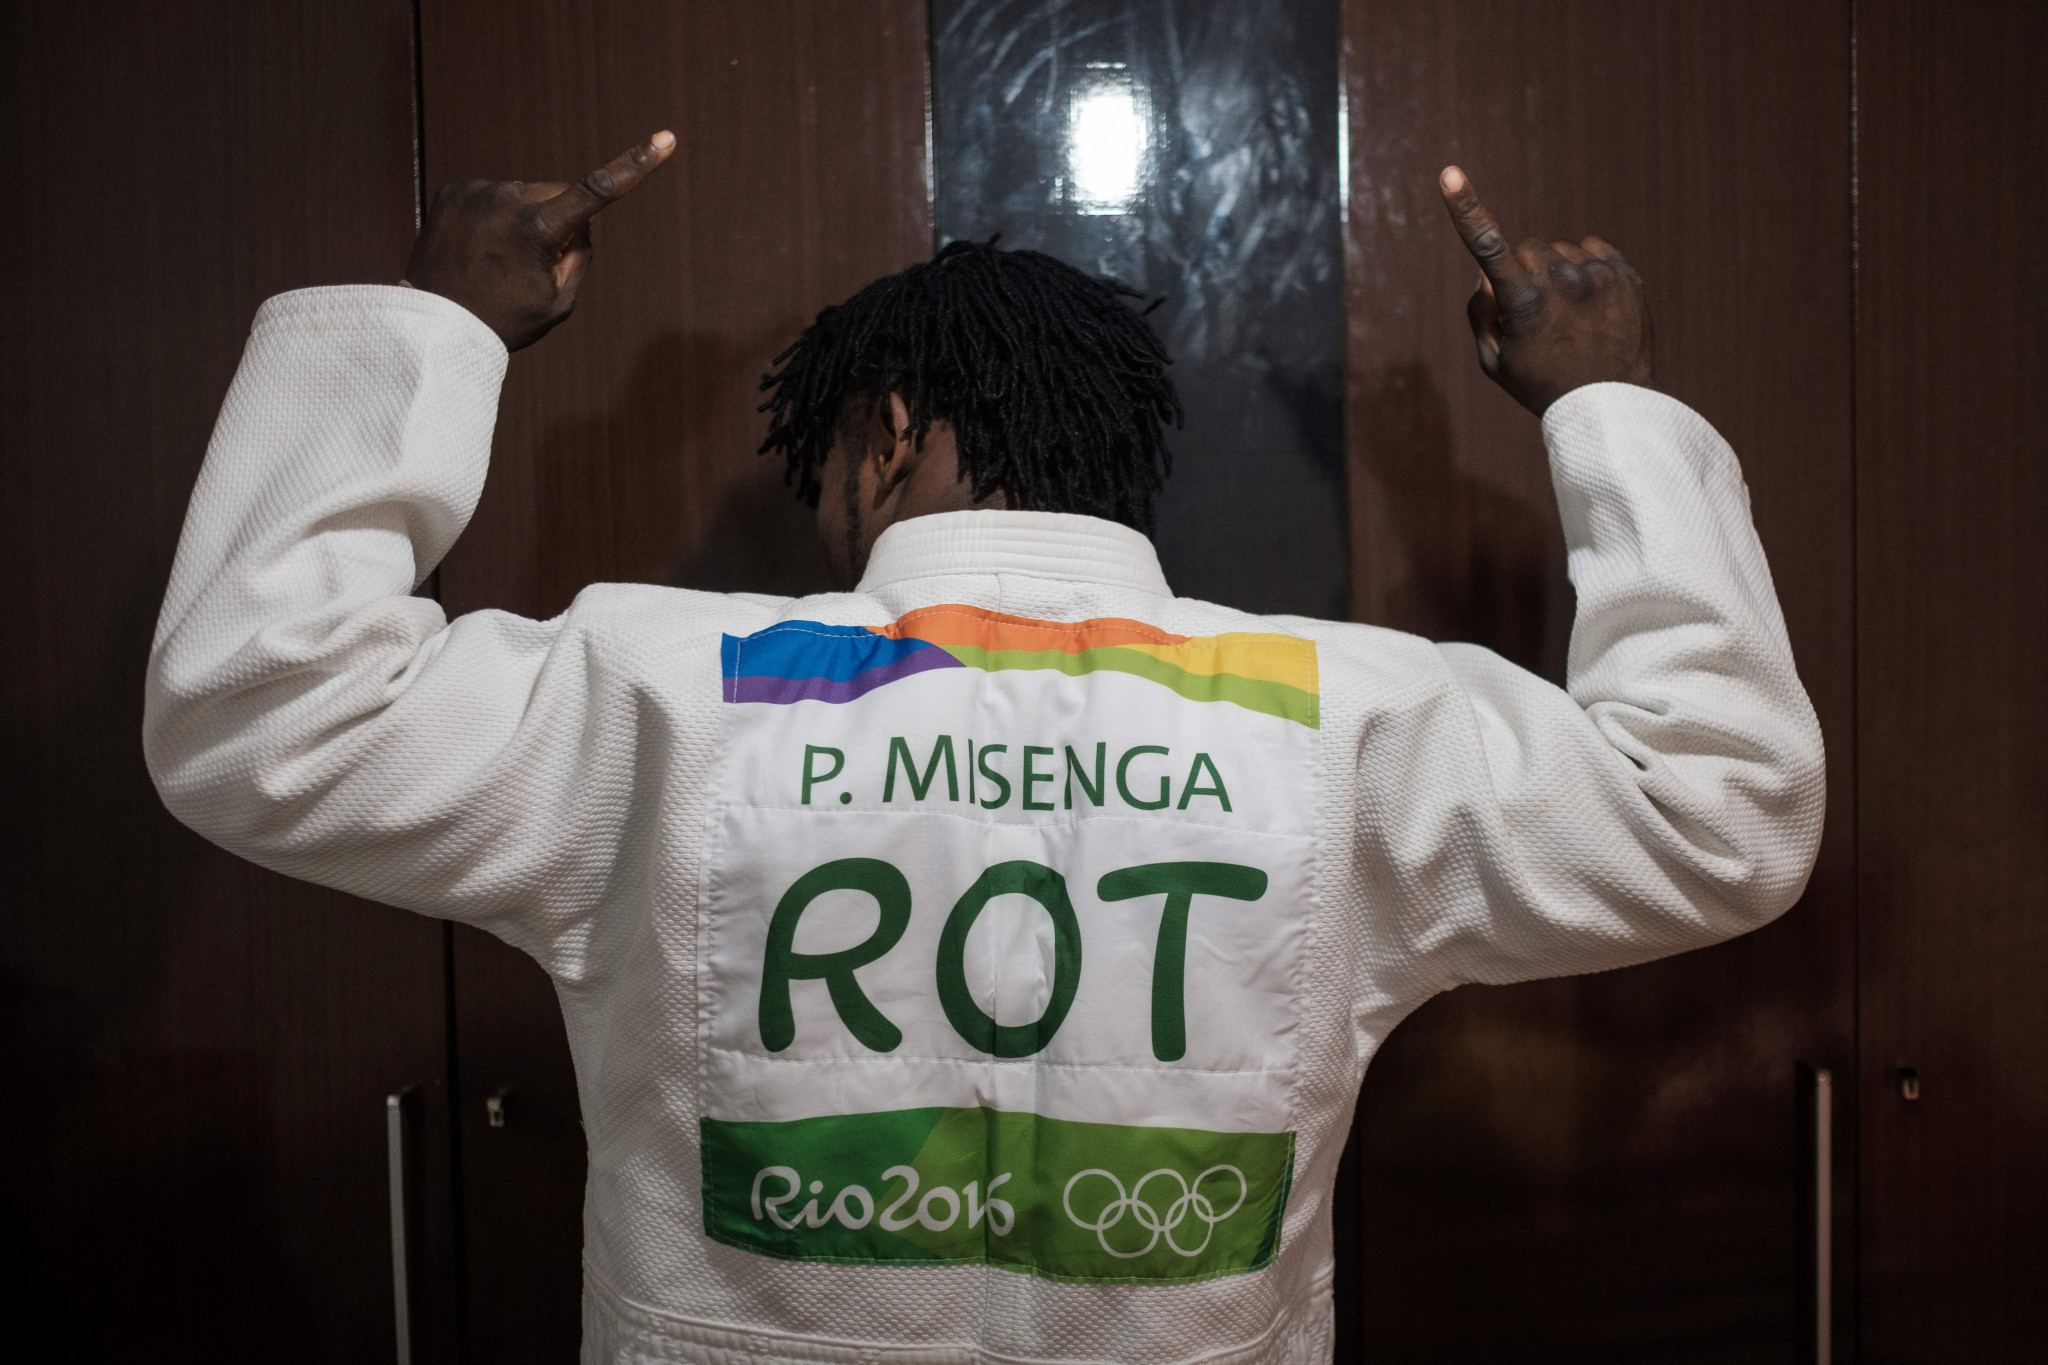 The refugee team made its debut at the Rio 2016 Olympic Games ©Getty Images